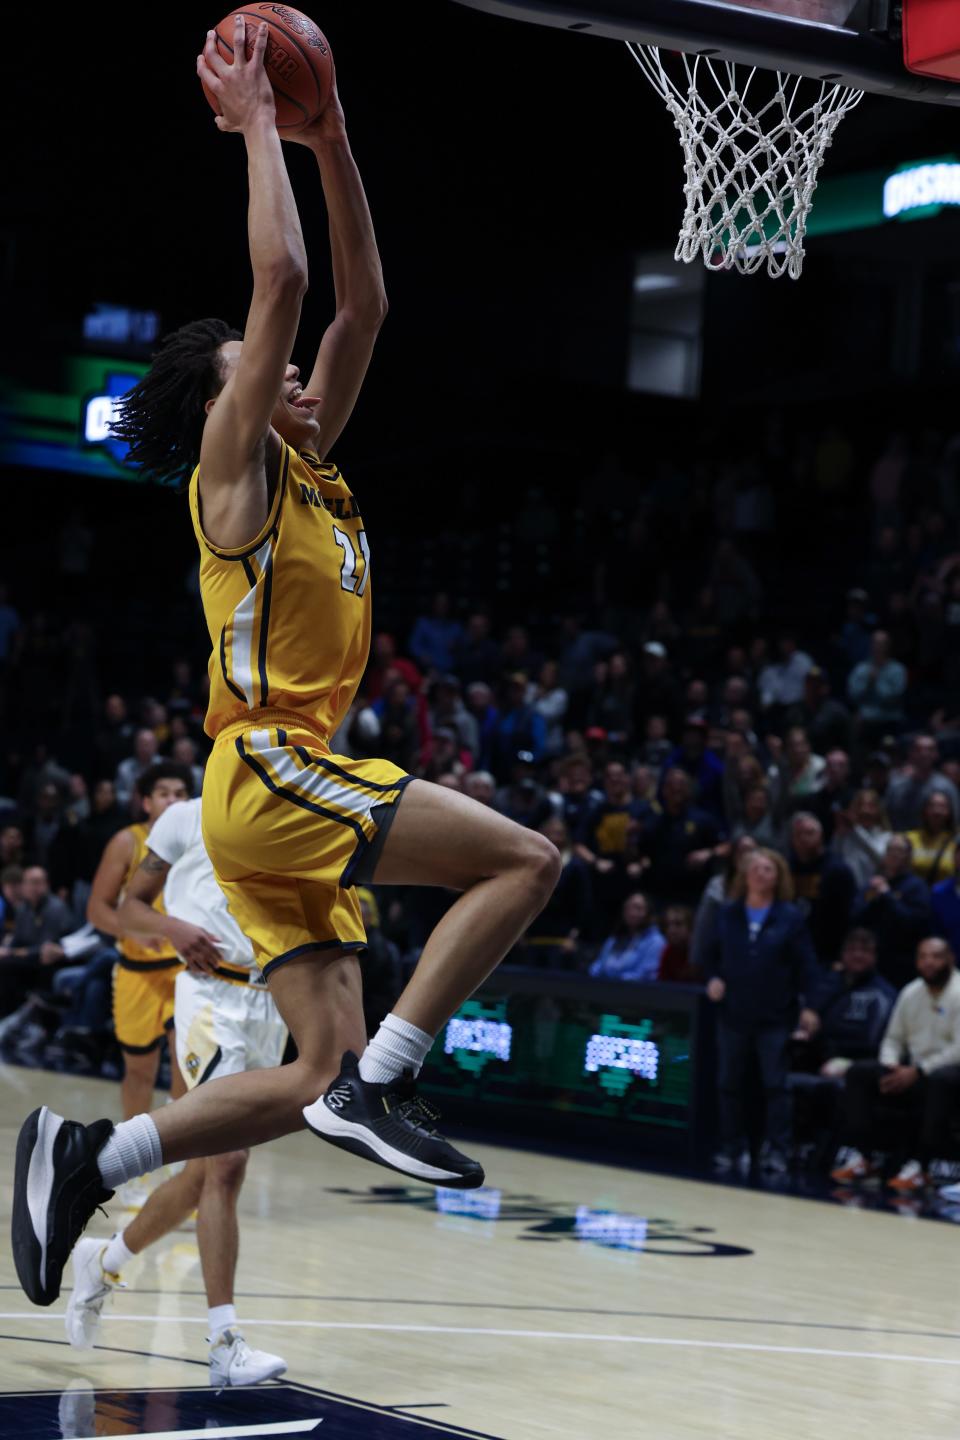 Alex Kazanecki of Moeller on this dunk gives them a 63-57 lead with 1:36 left in the first overtime. Moeller played Centerville High School in a Division I regional final. Centerville won in double overtime 70-69.